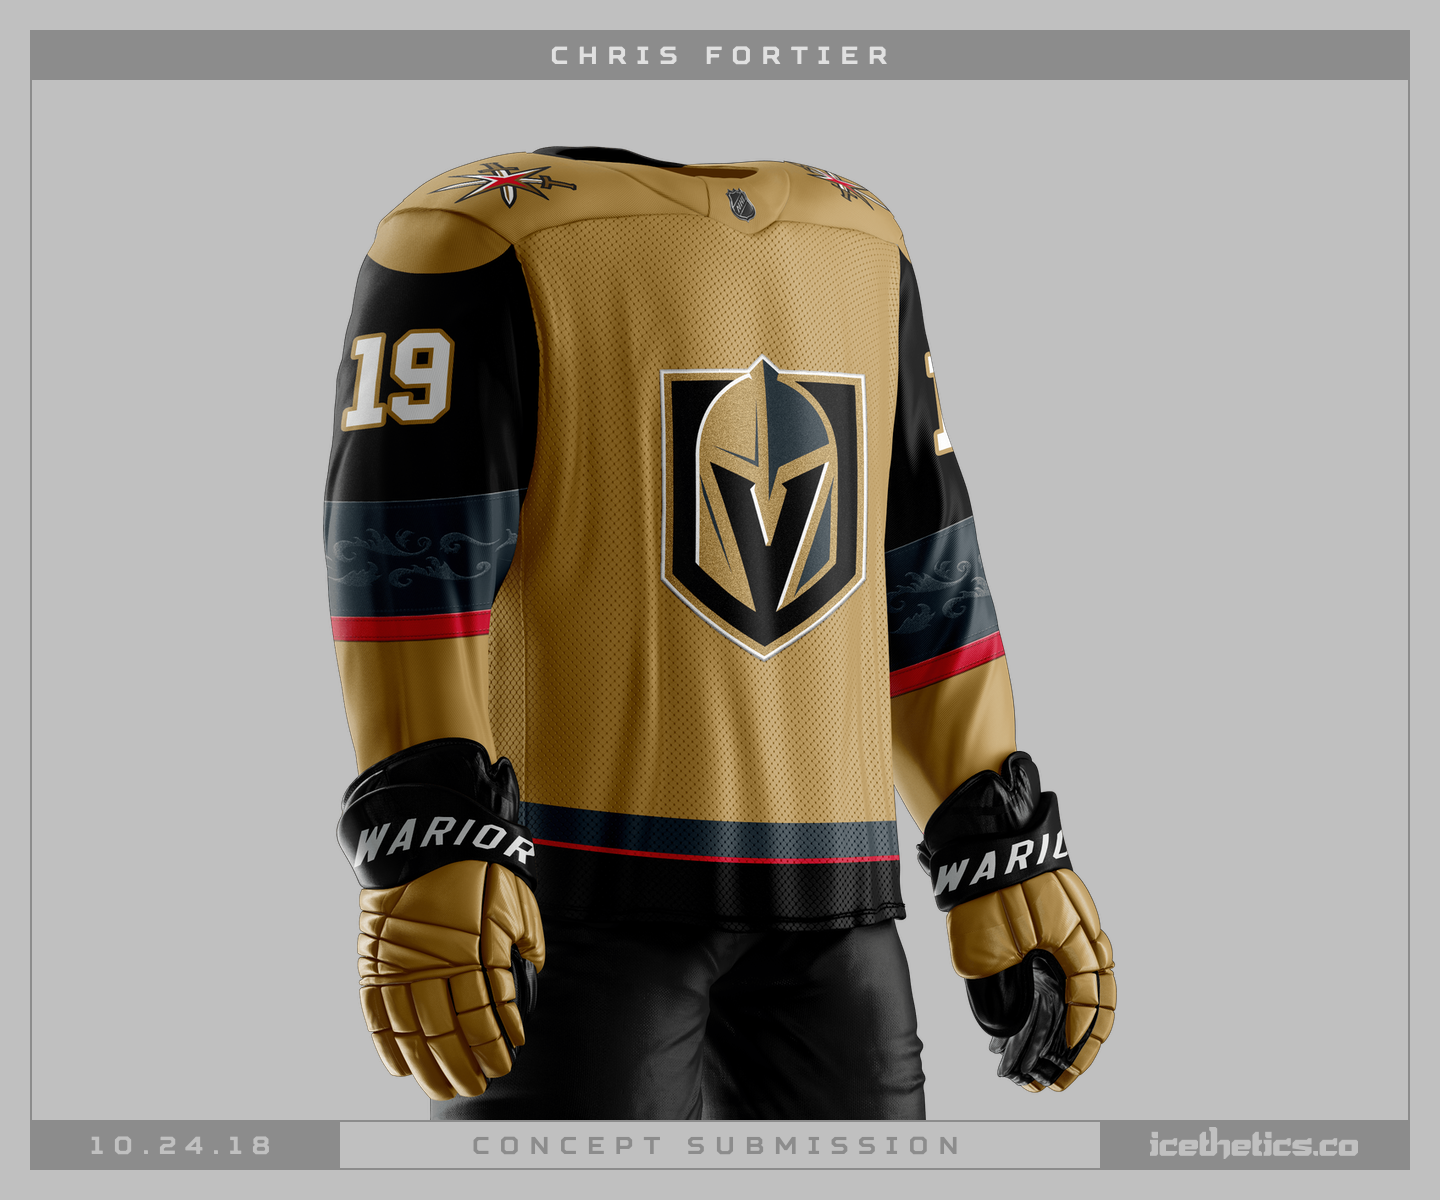 The Golden Knights sparkly, gold jerseys are unapologetically Vegas